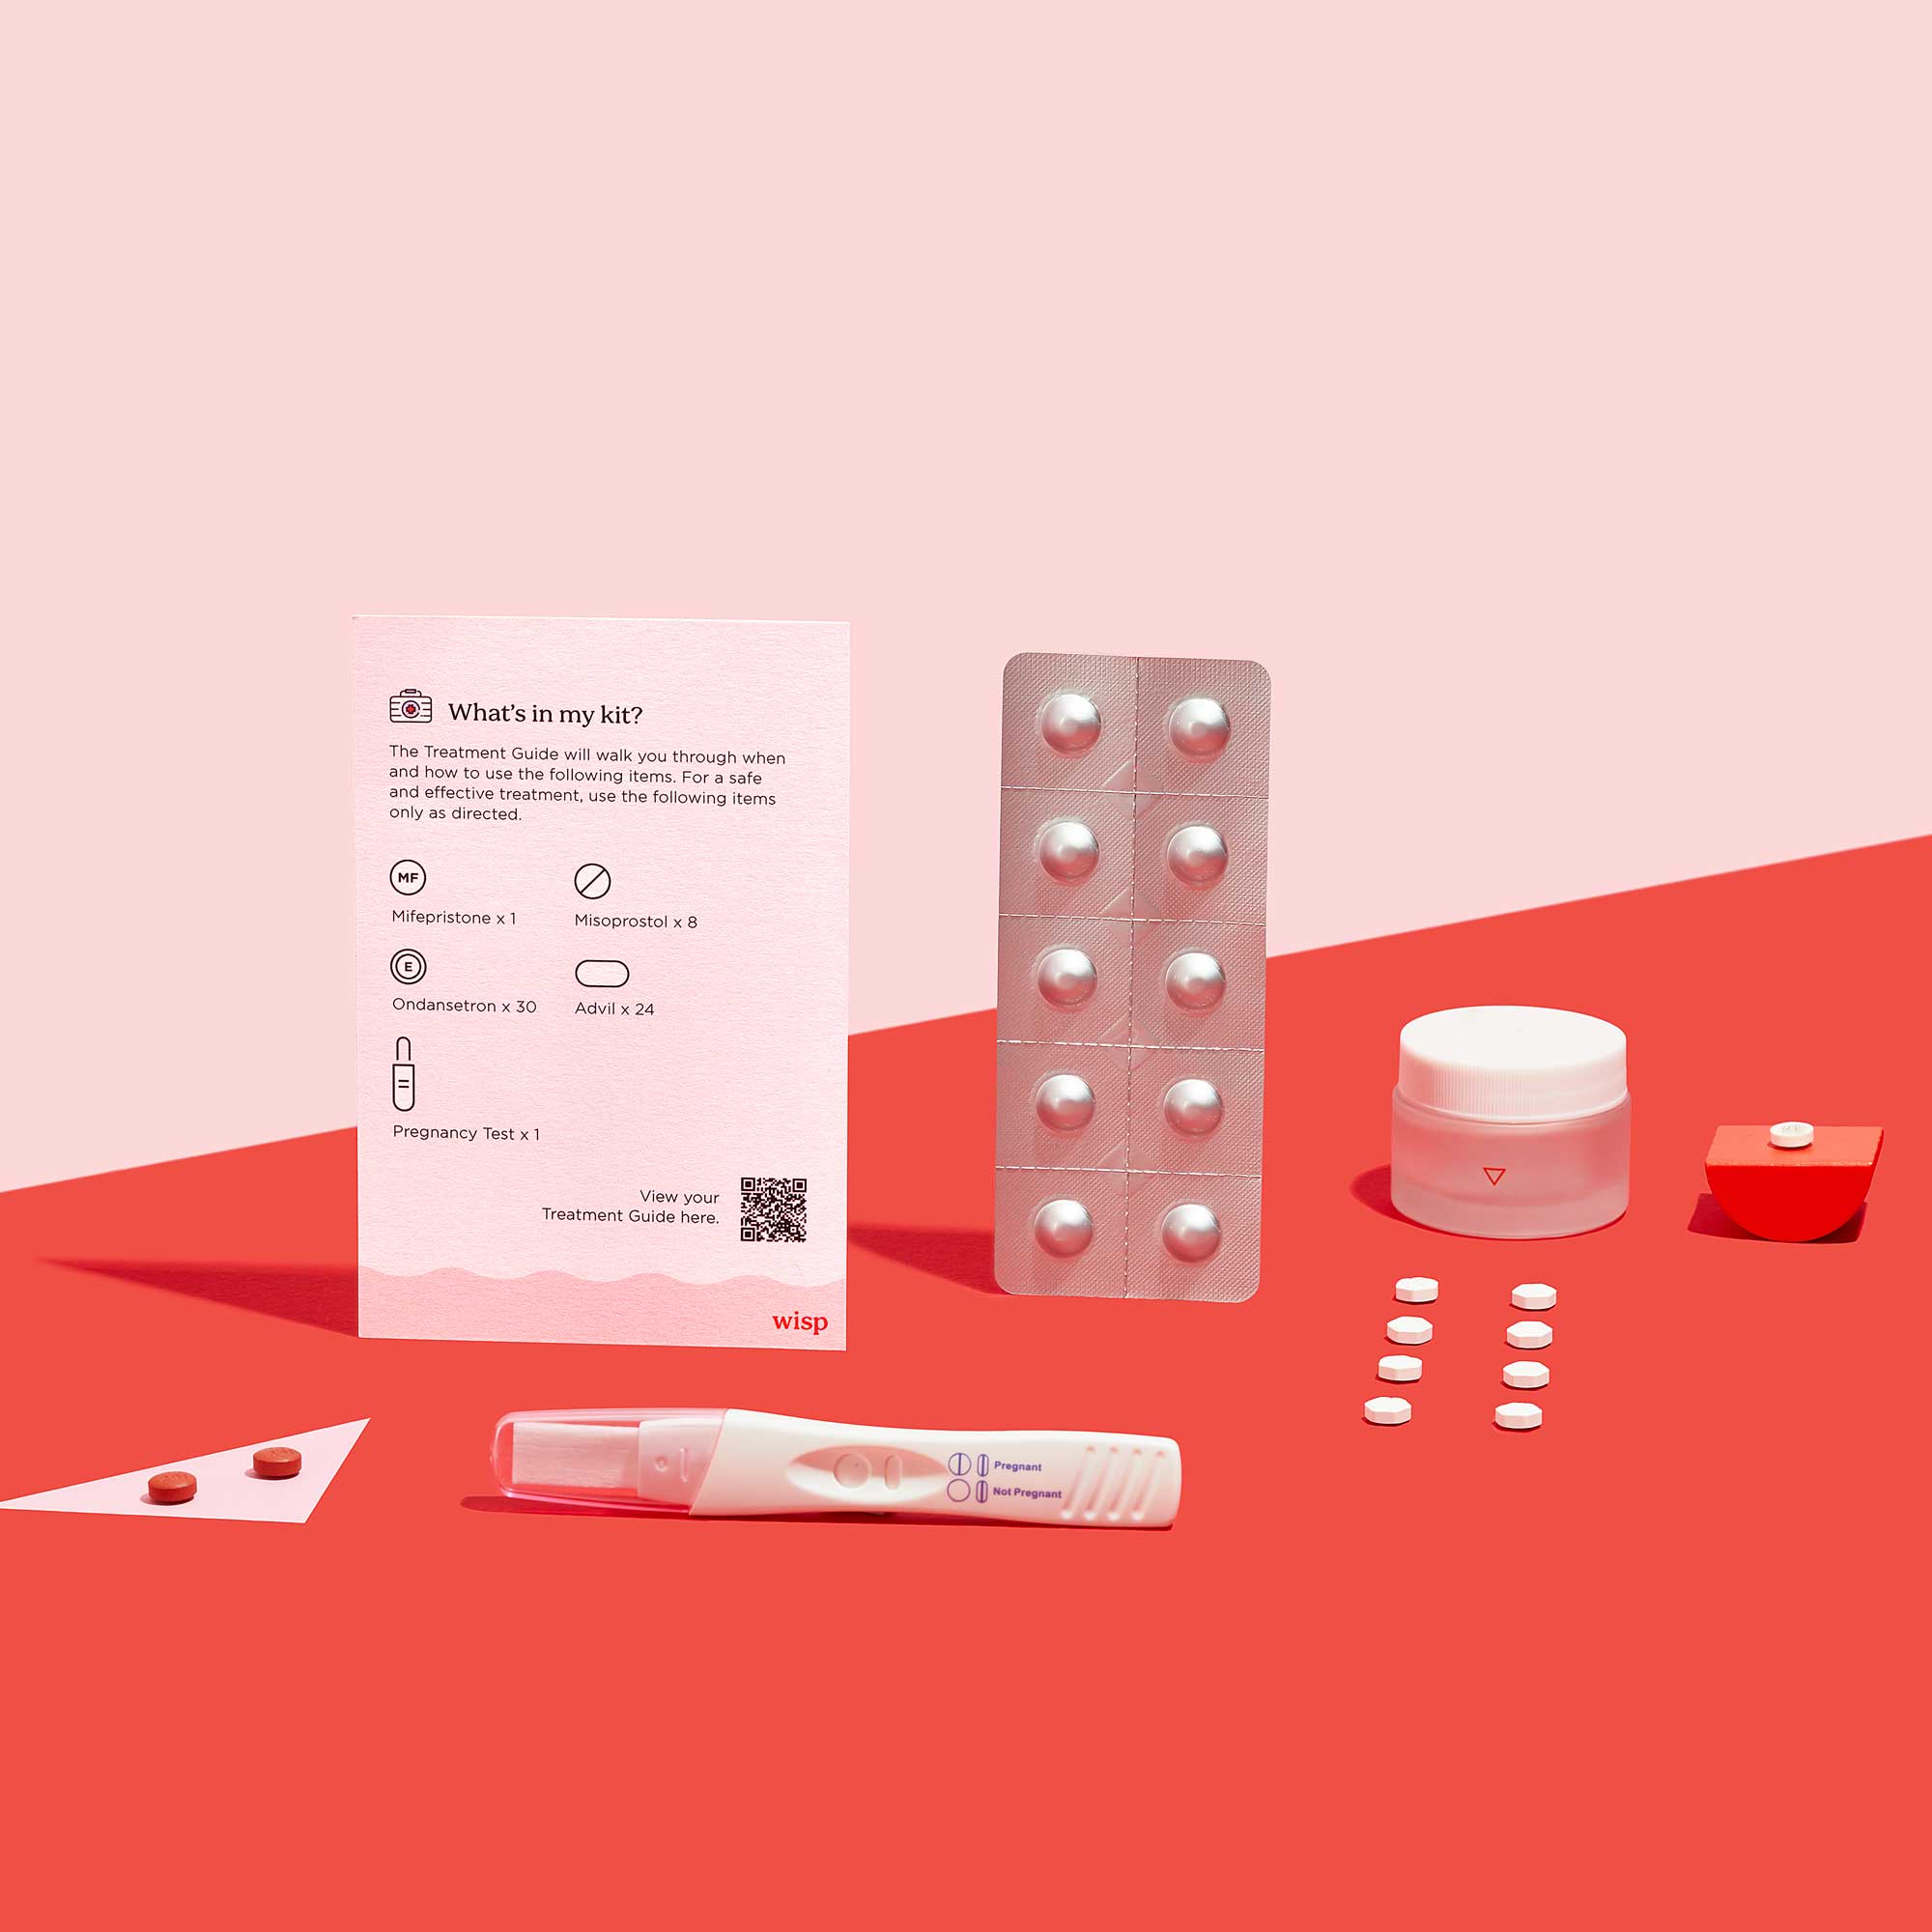 Wisp Medication Abortion kit contents on a red surface, on a pink background